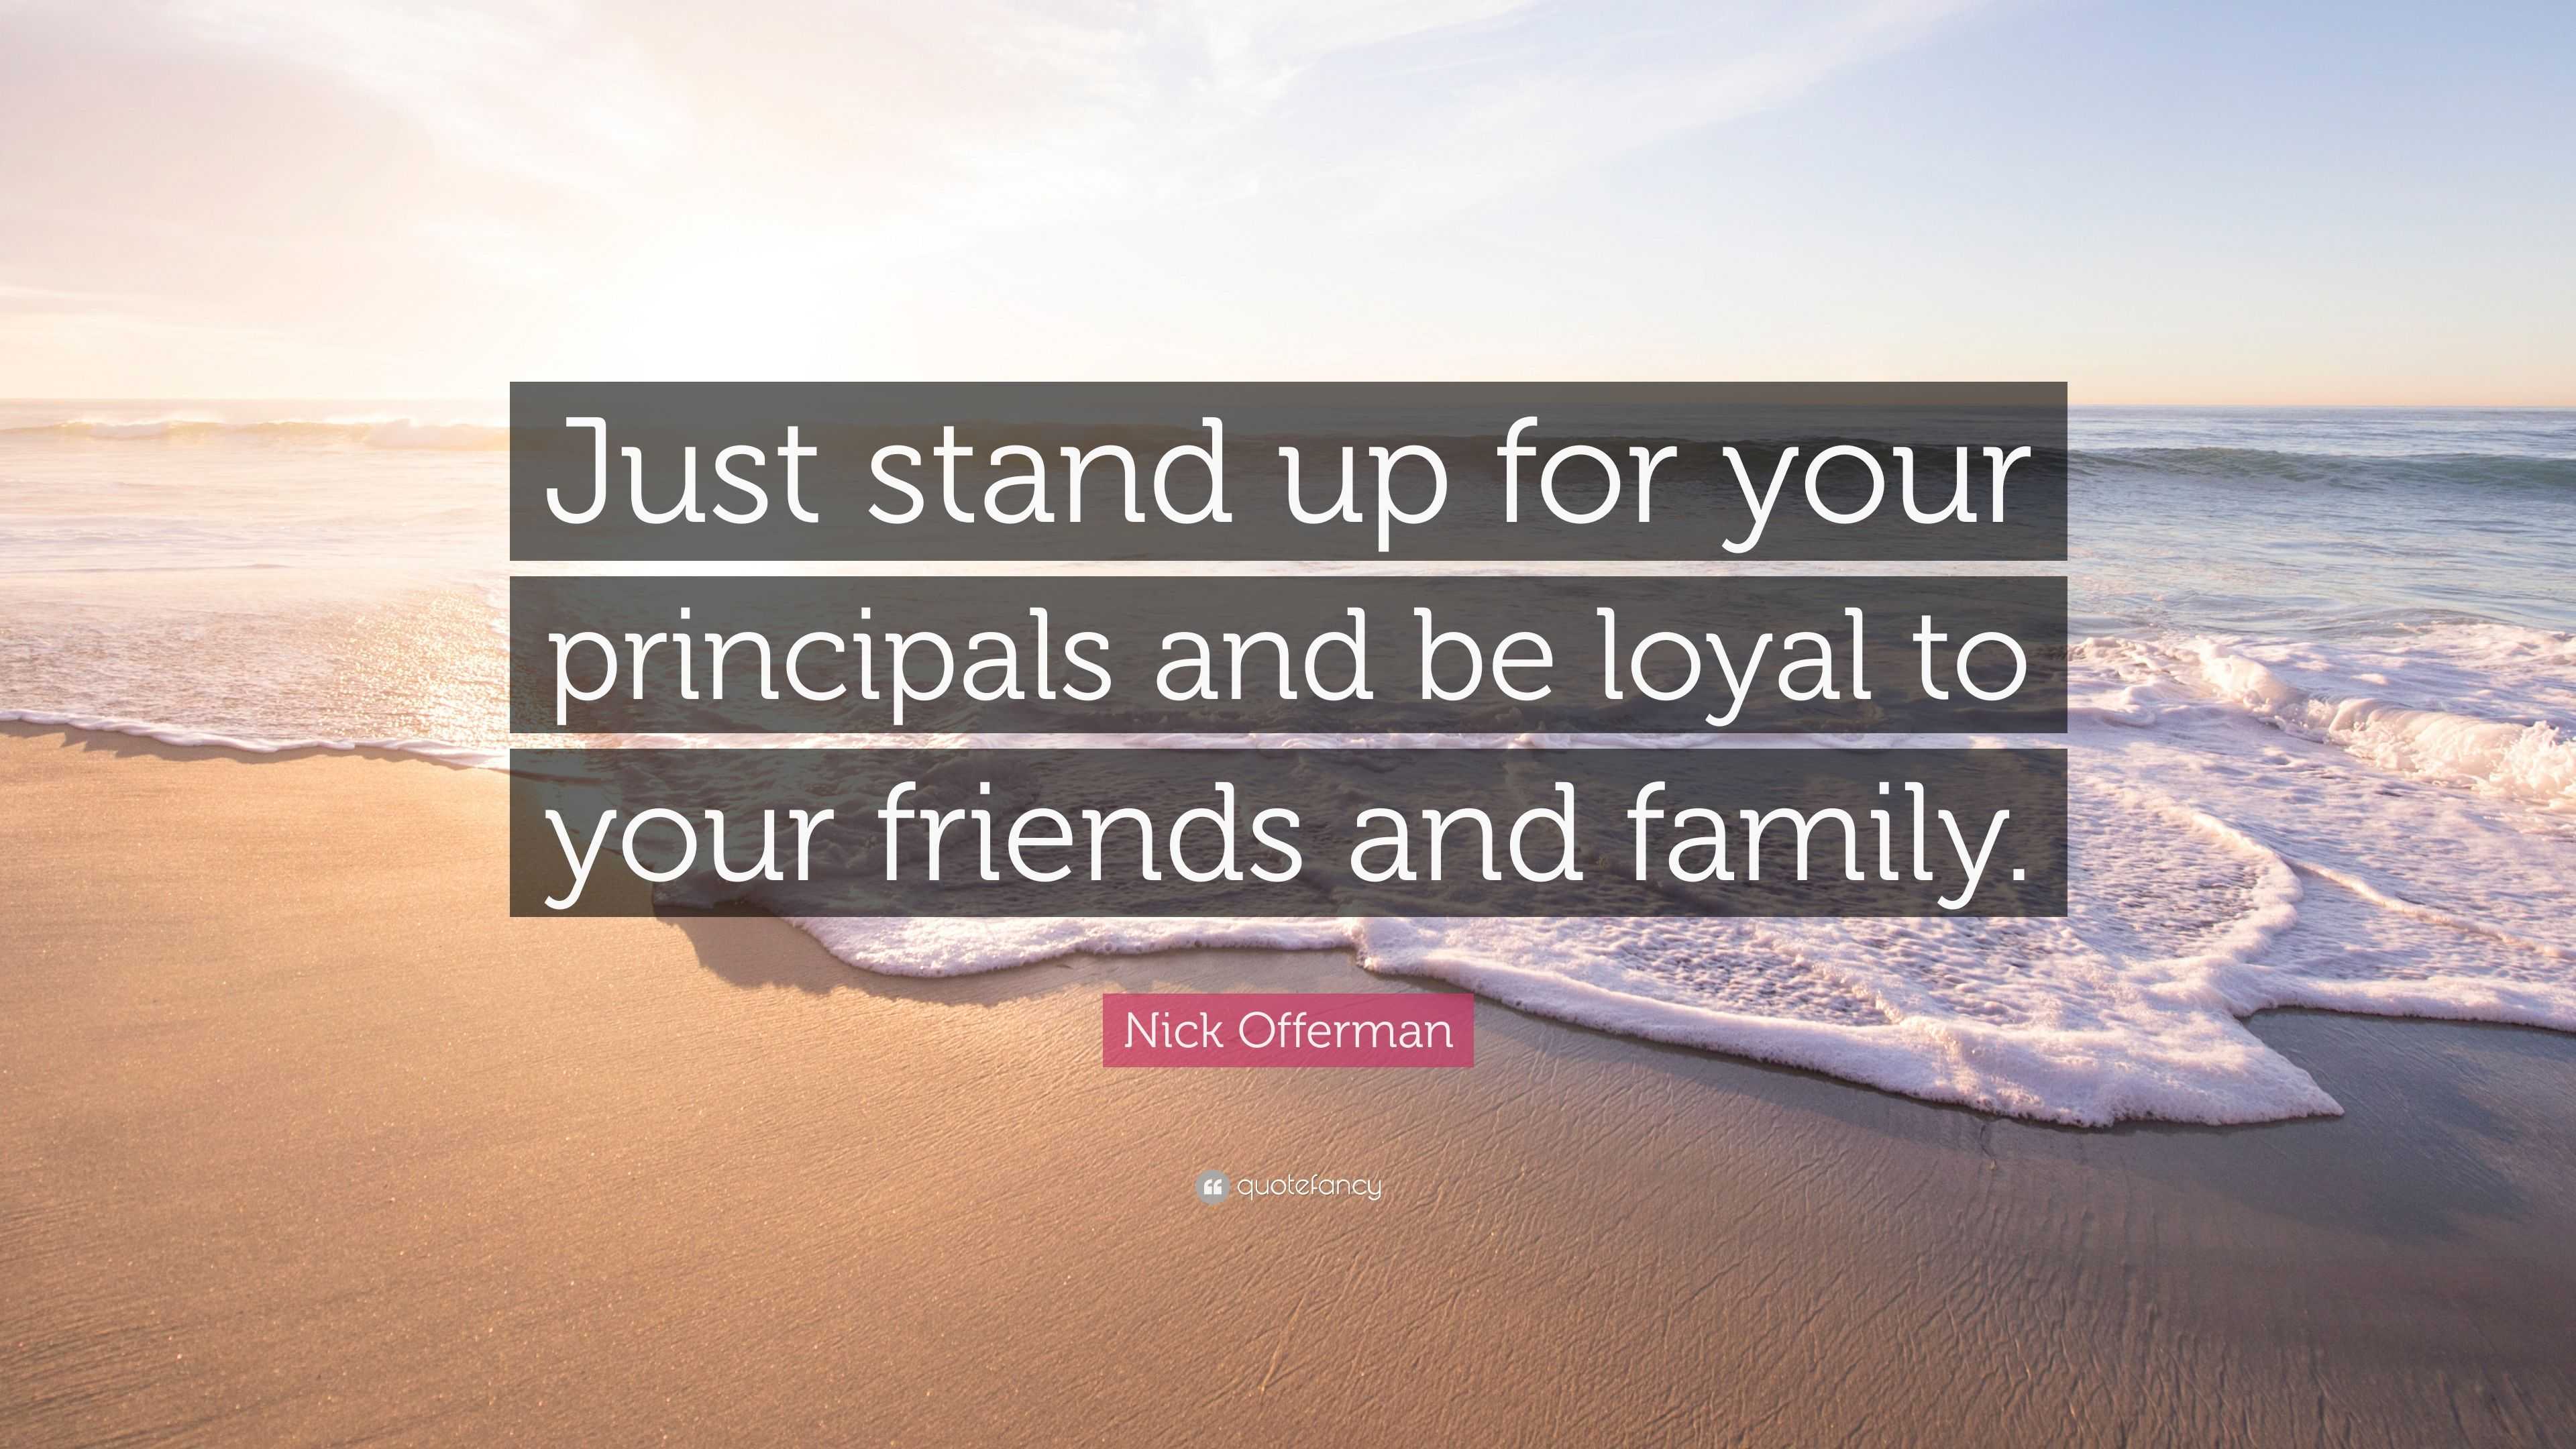 Just stand up for your principals and be loyal to your friends and family. 